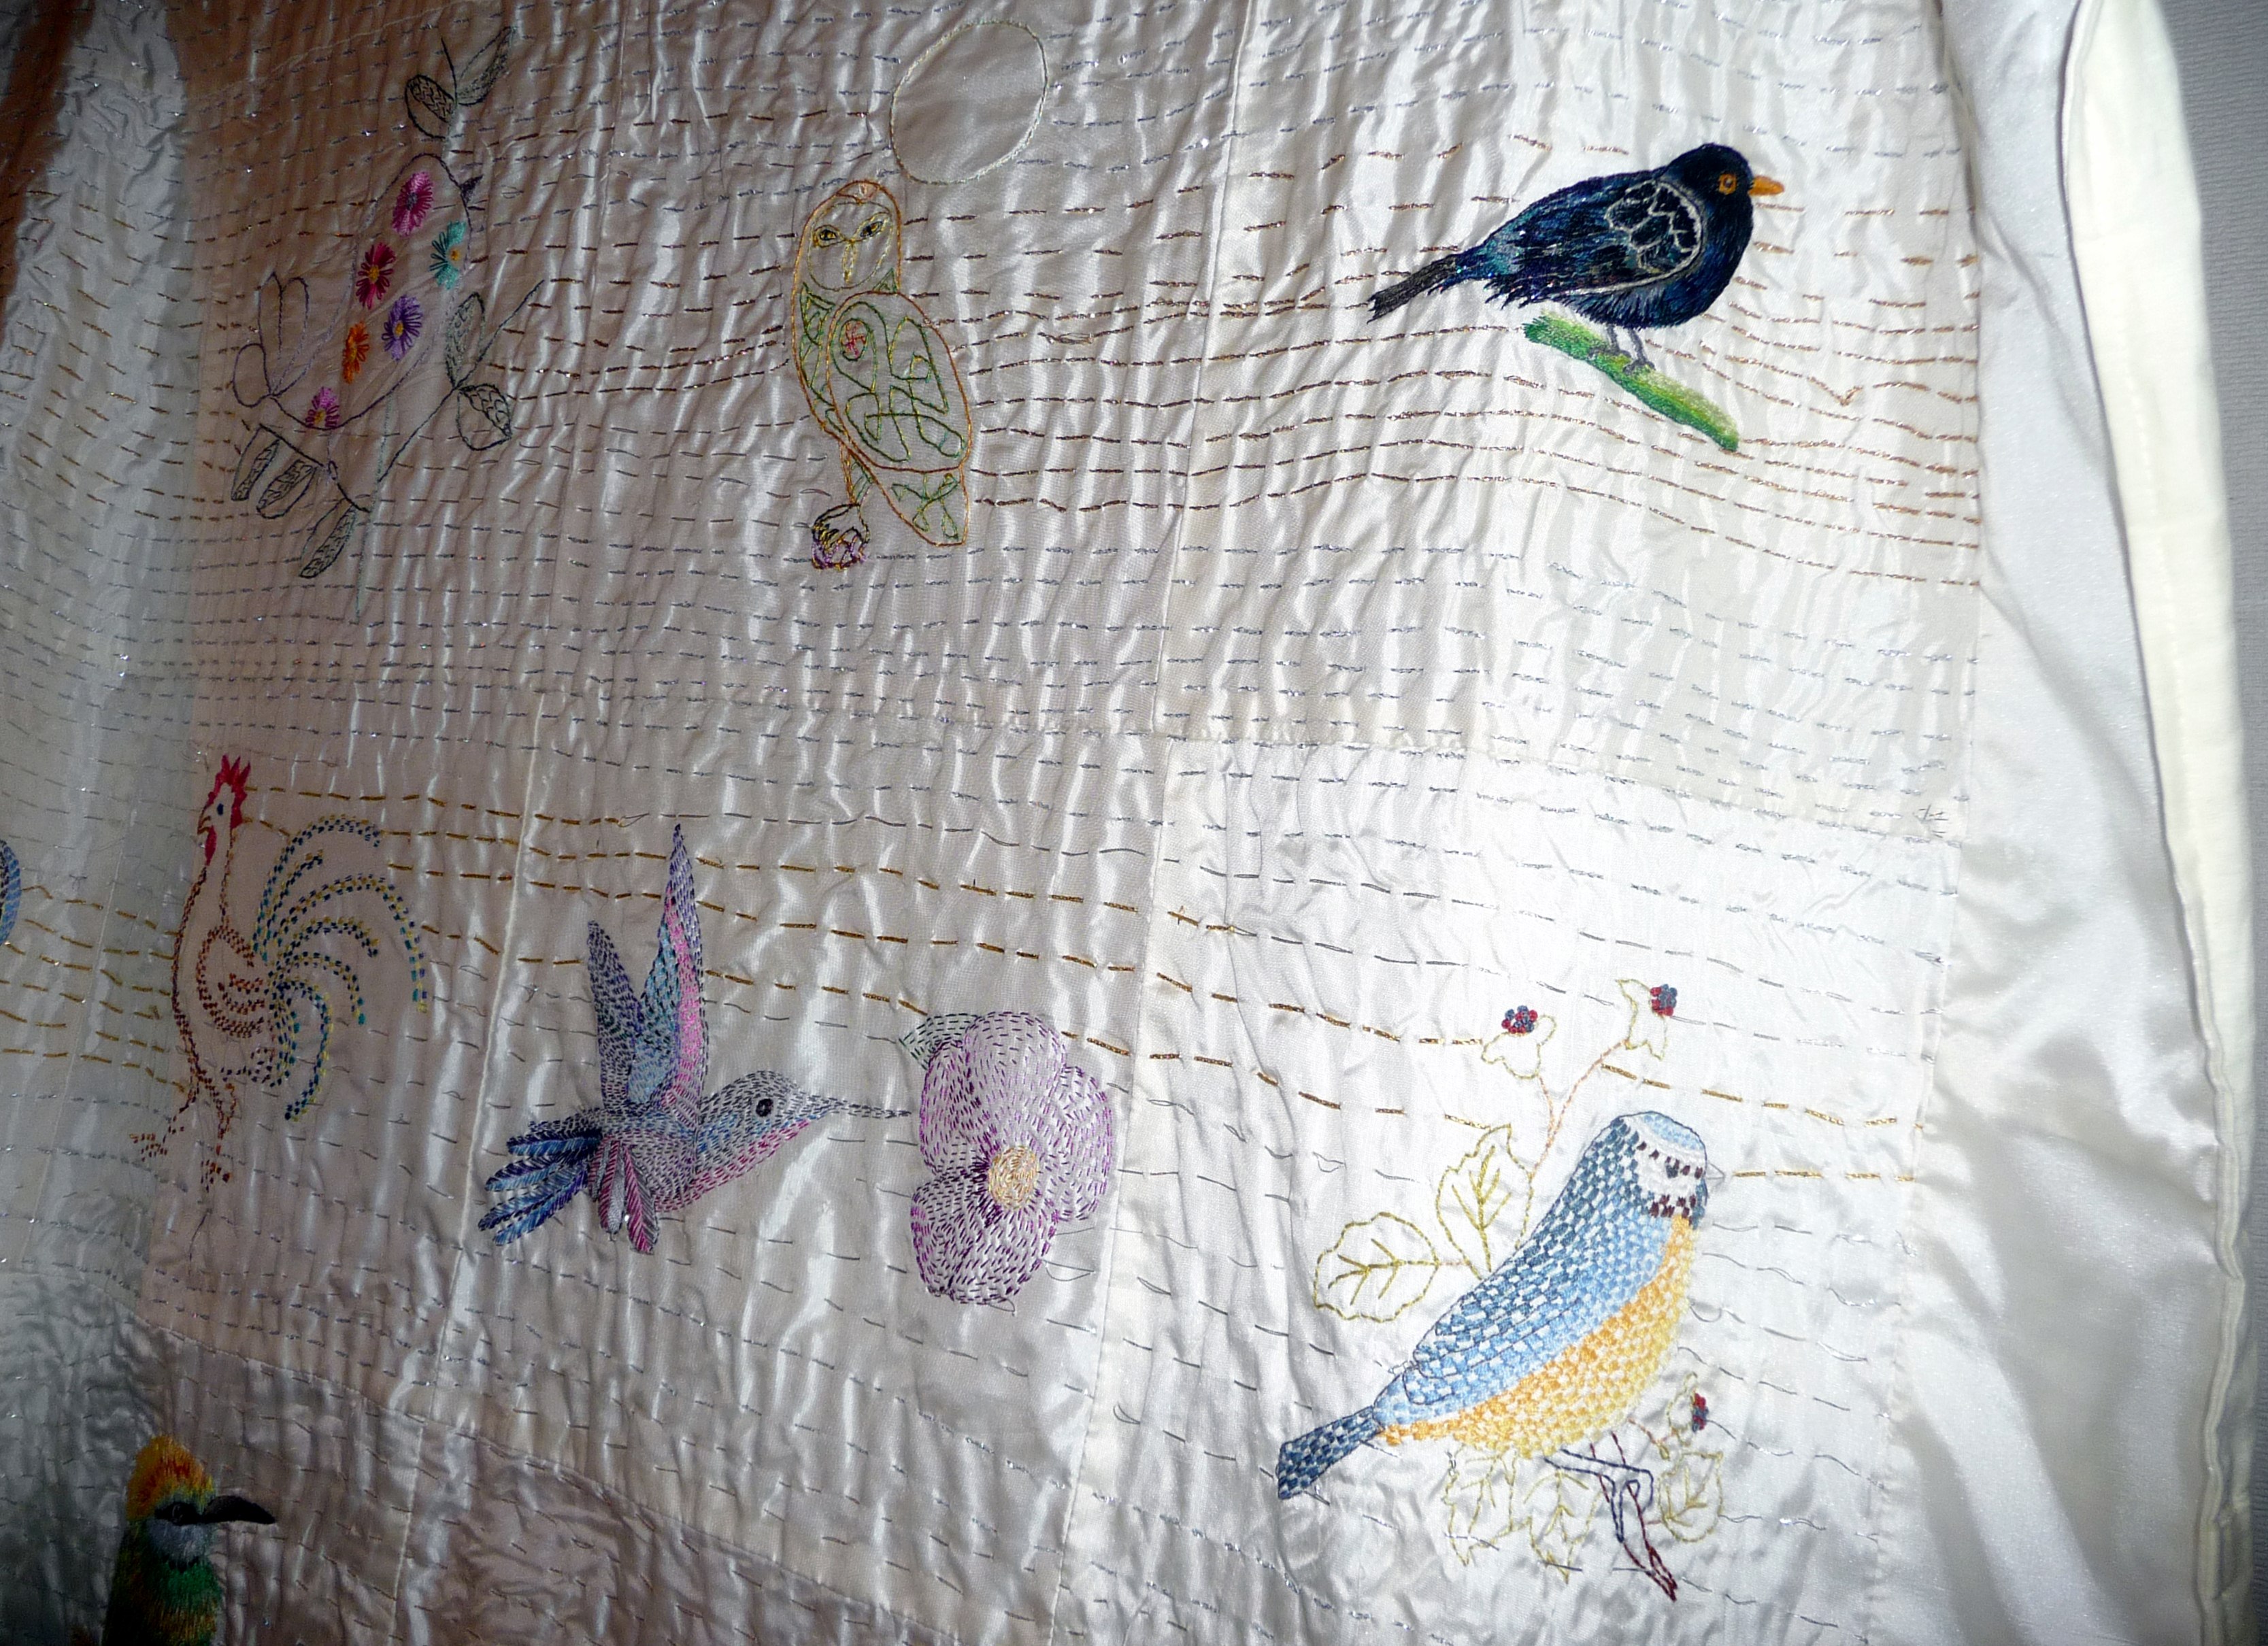 Sreepur quilt with embroidered birds which will be raffled to raise funds for Sreepur Orphanage and Womens Refuge, Bangladesh